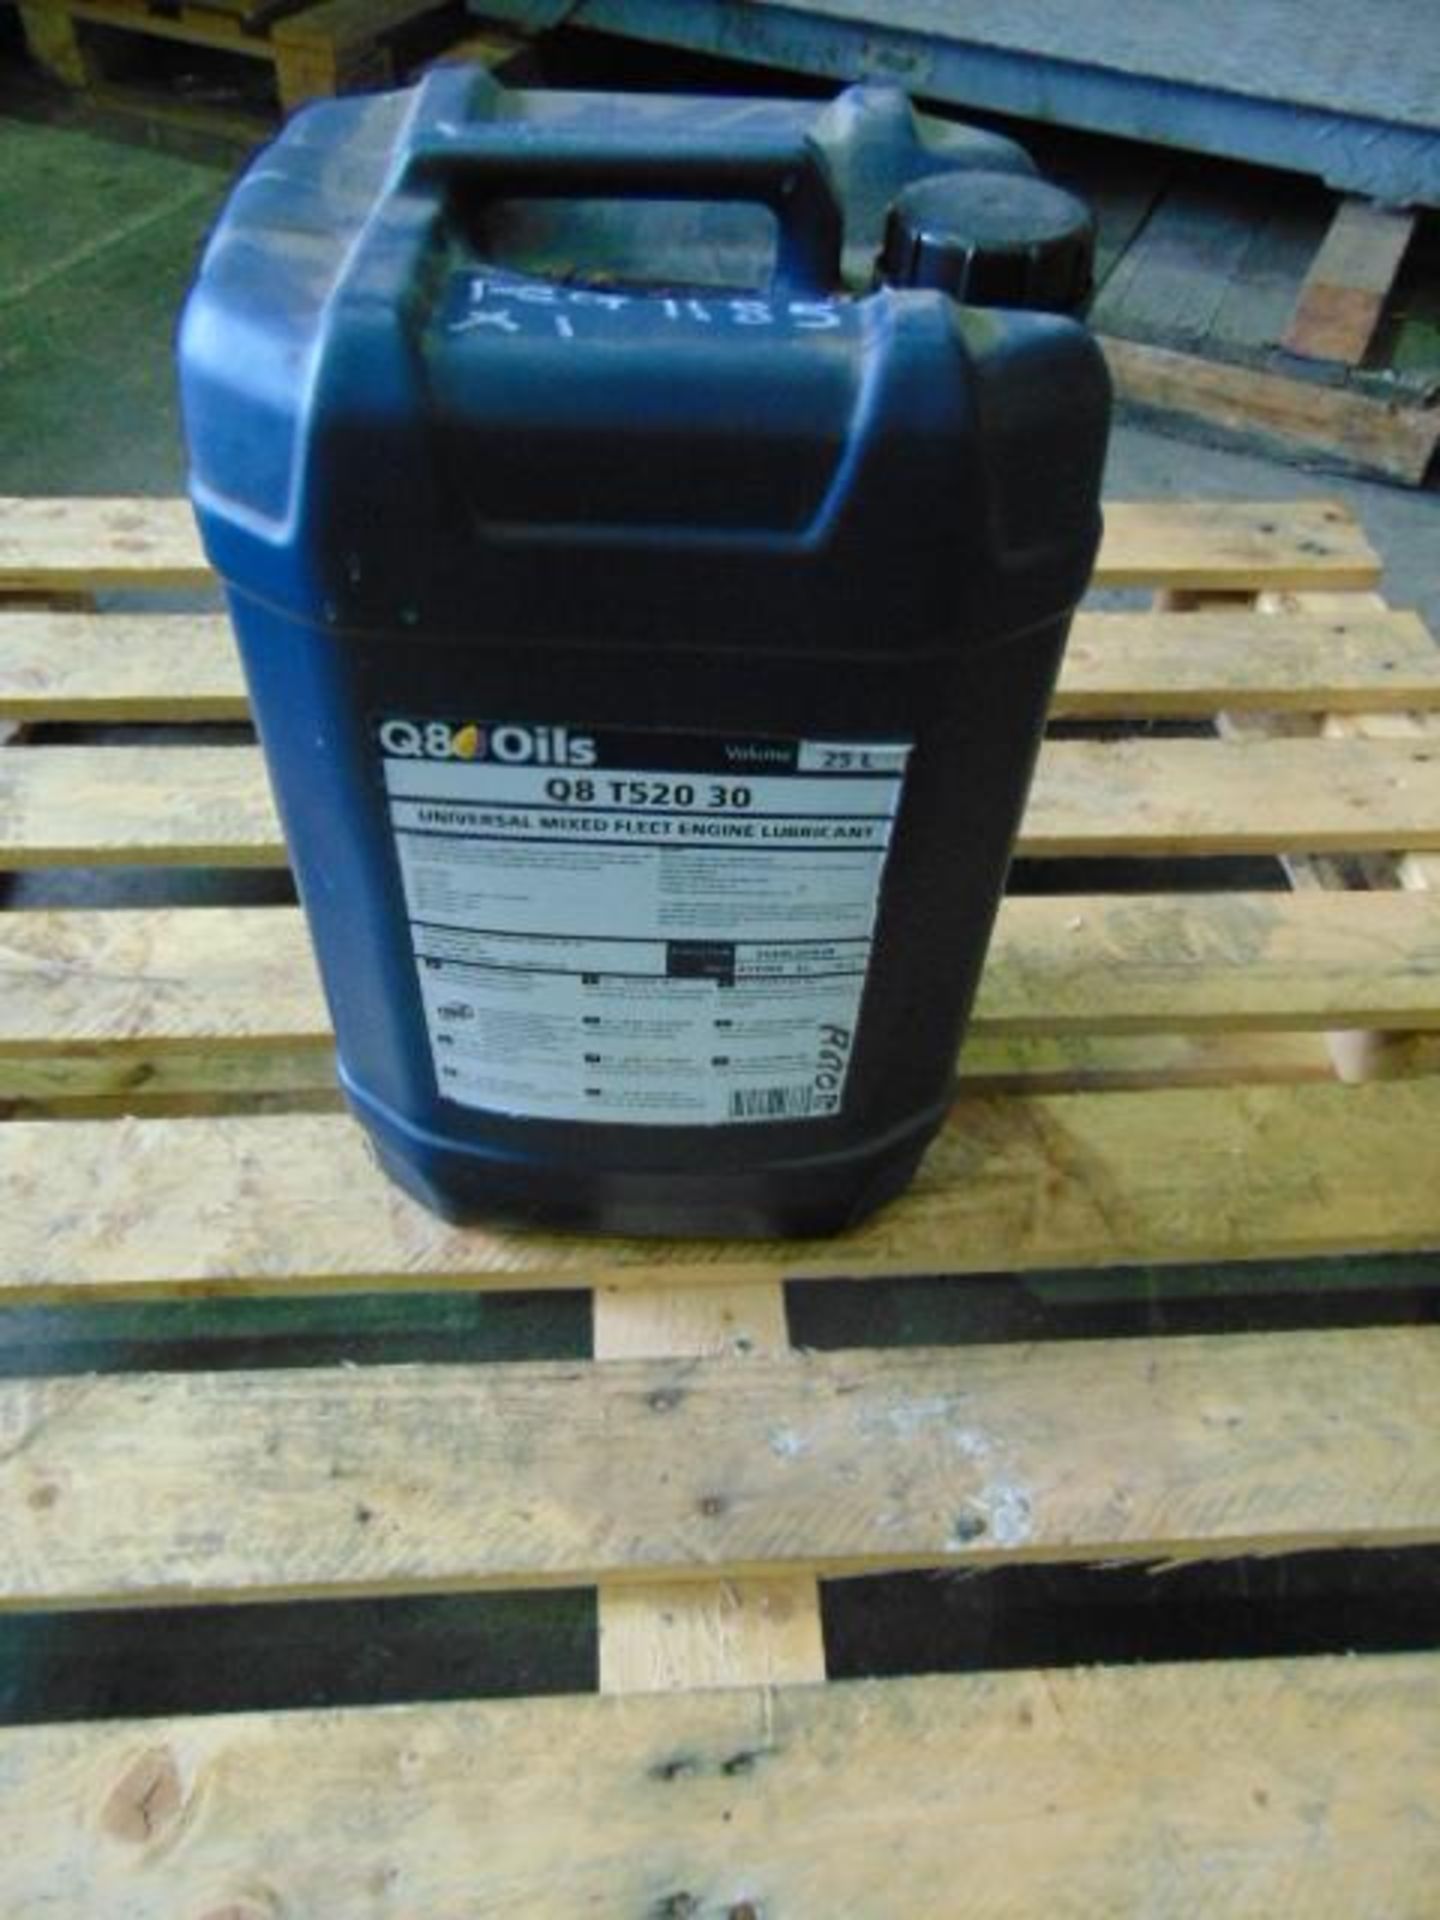 Qty 1 x 25Ltr Q8 T520 30Universal Mixed Fleet Engine Lubricant suitable for trucks HGVs Etc